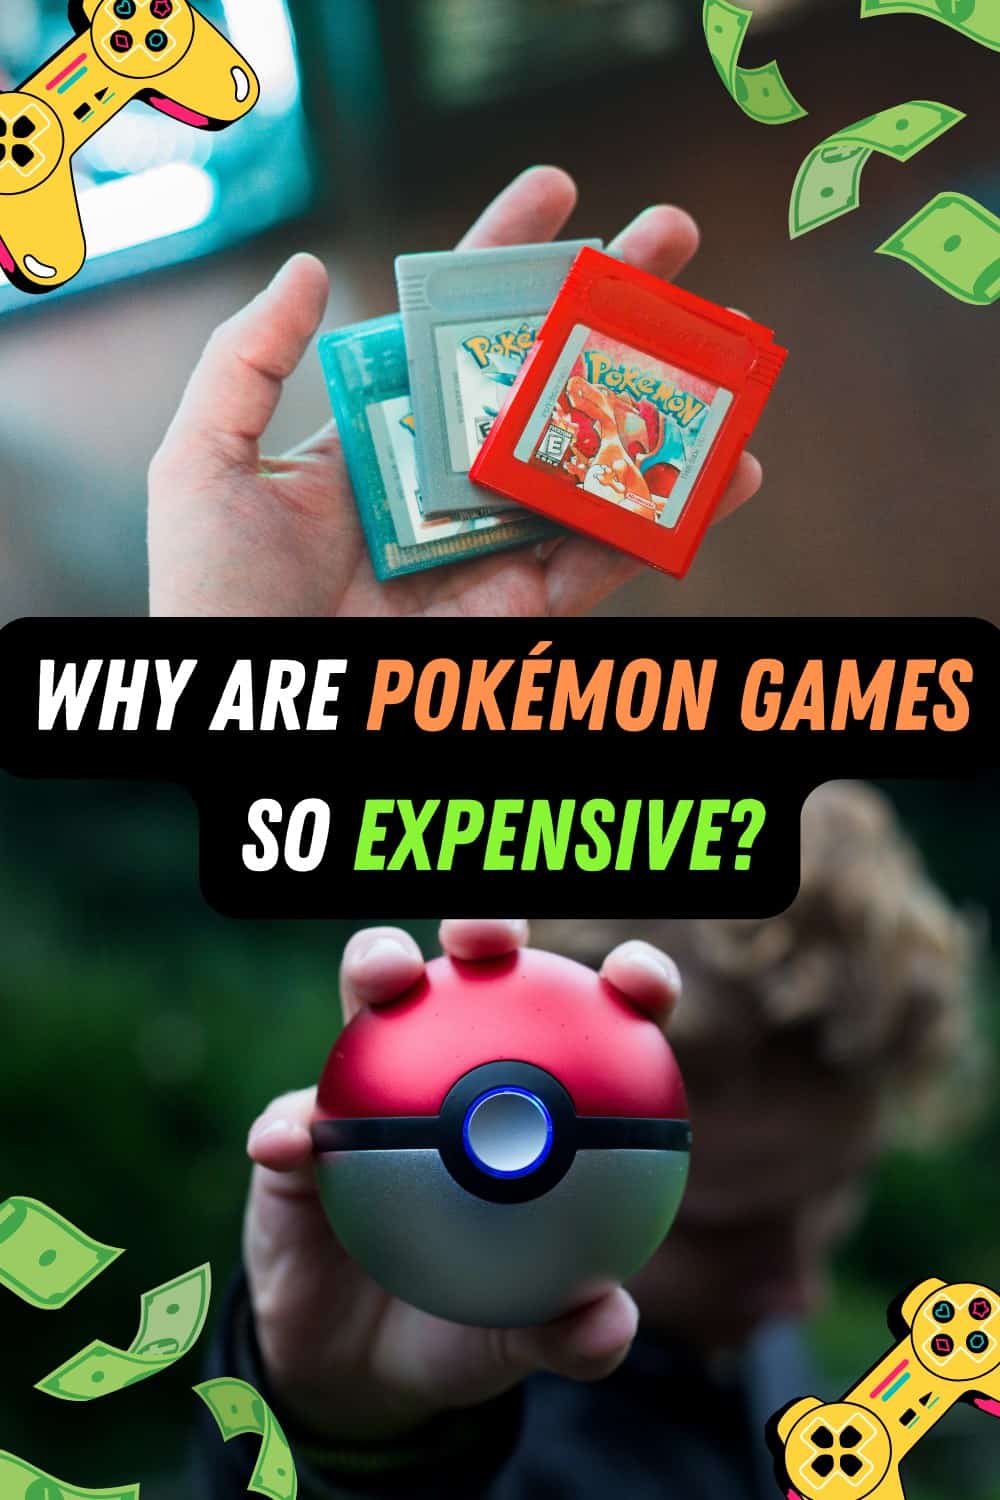 Old Pokémon games are so expensive because demand far exceeds the supply